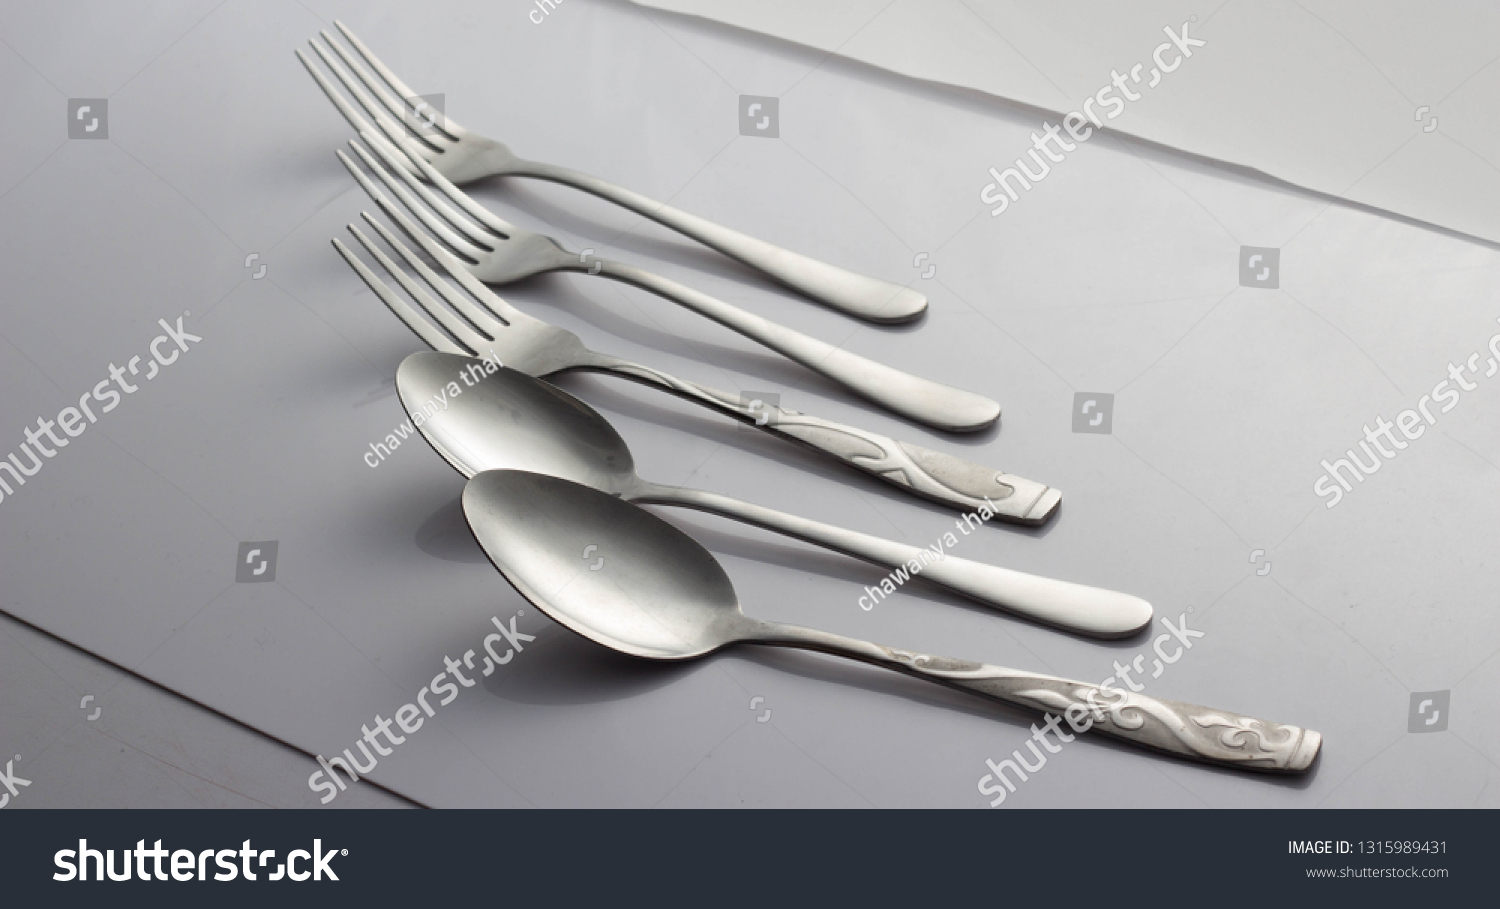 spoons and forks #1315989431